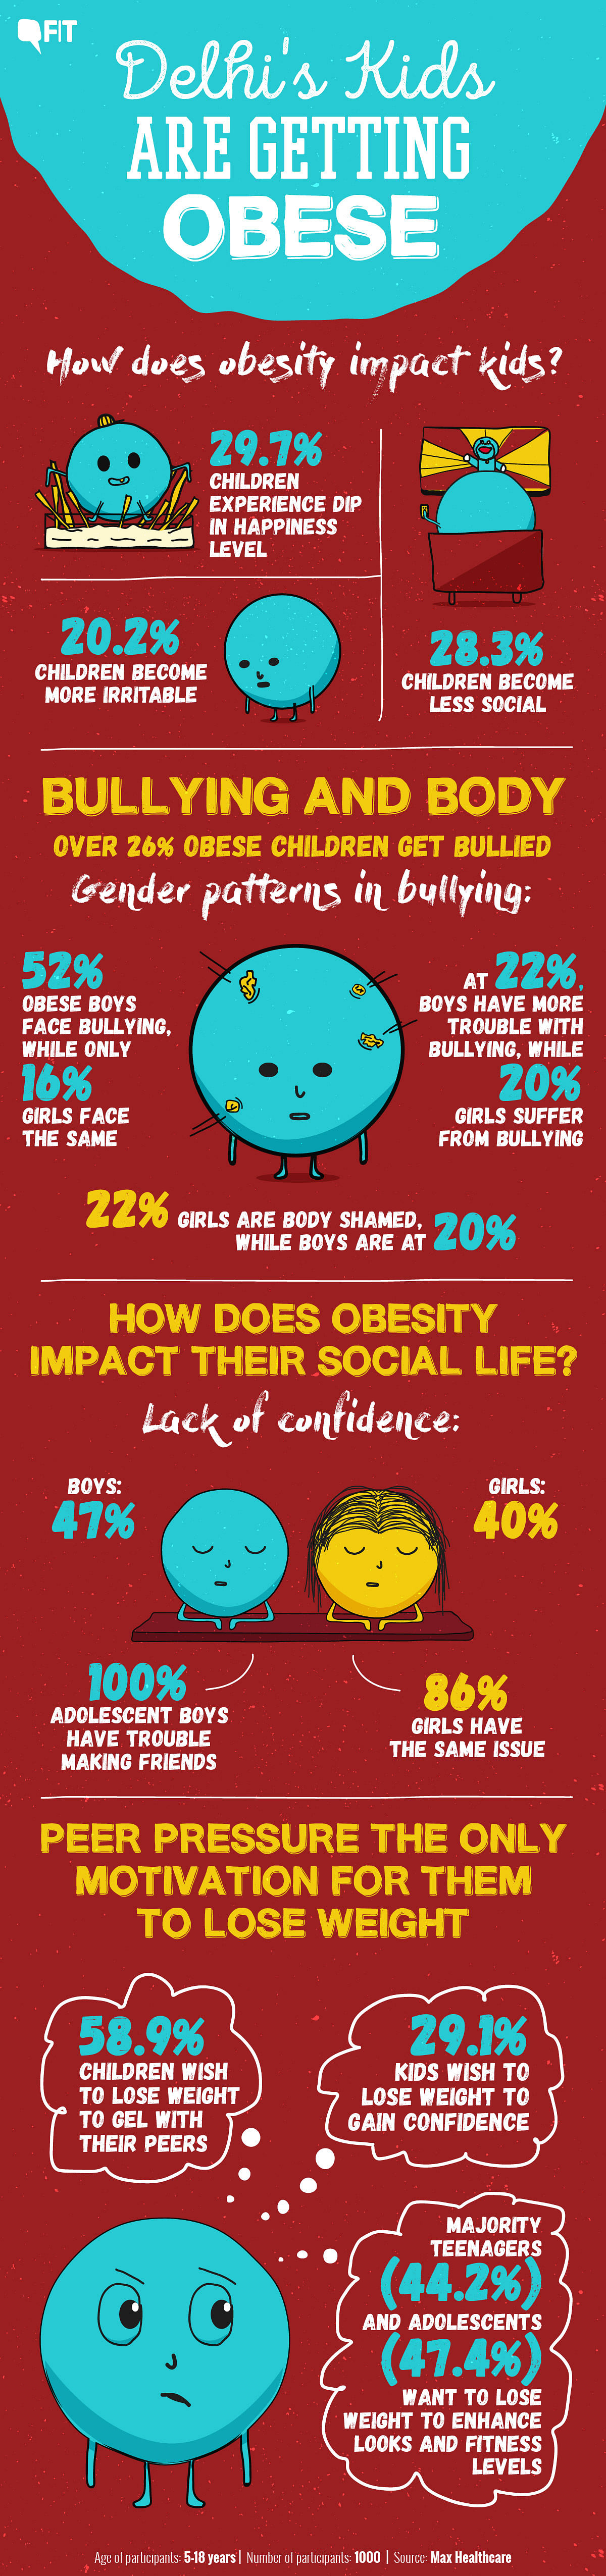 Obesity adversely impacts the emotional well-being of children by making them less sociable and more irritable.